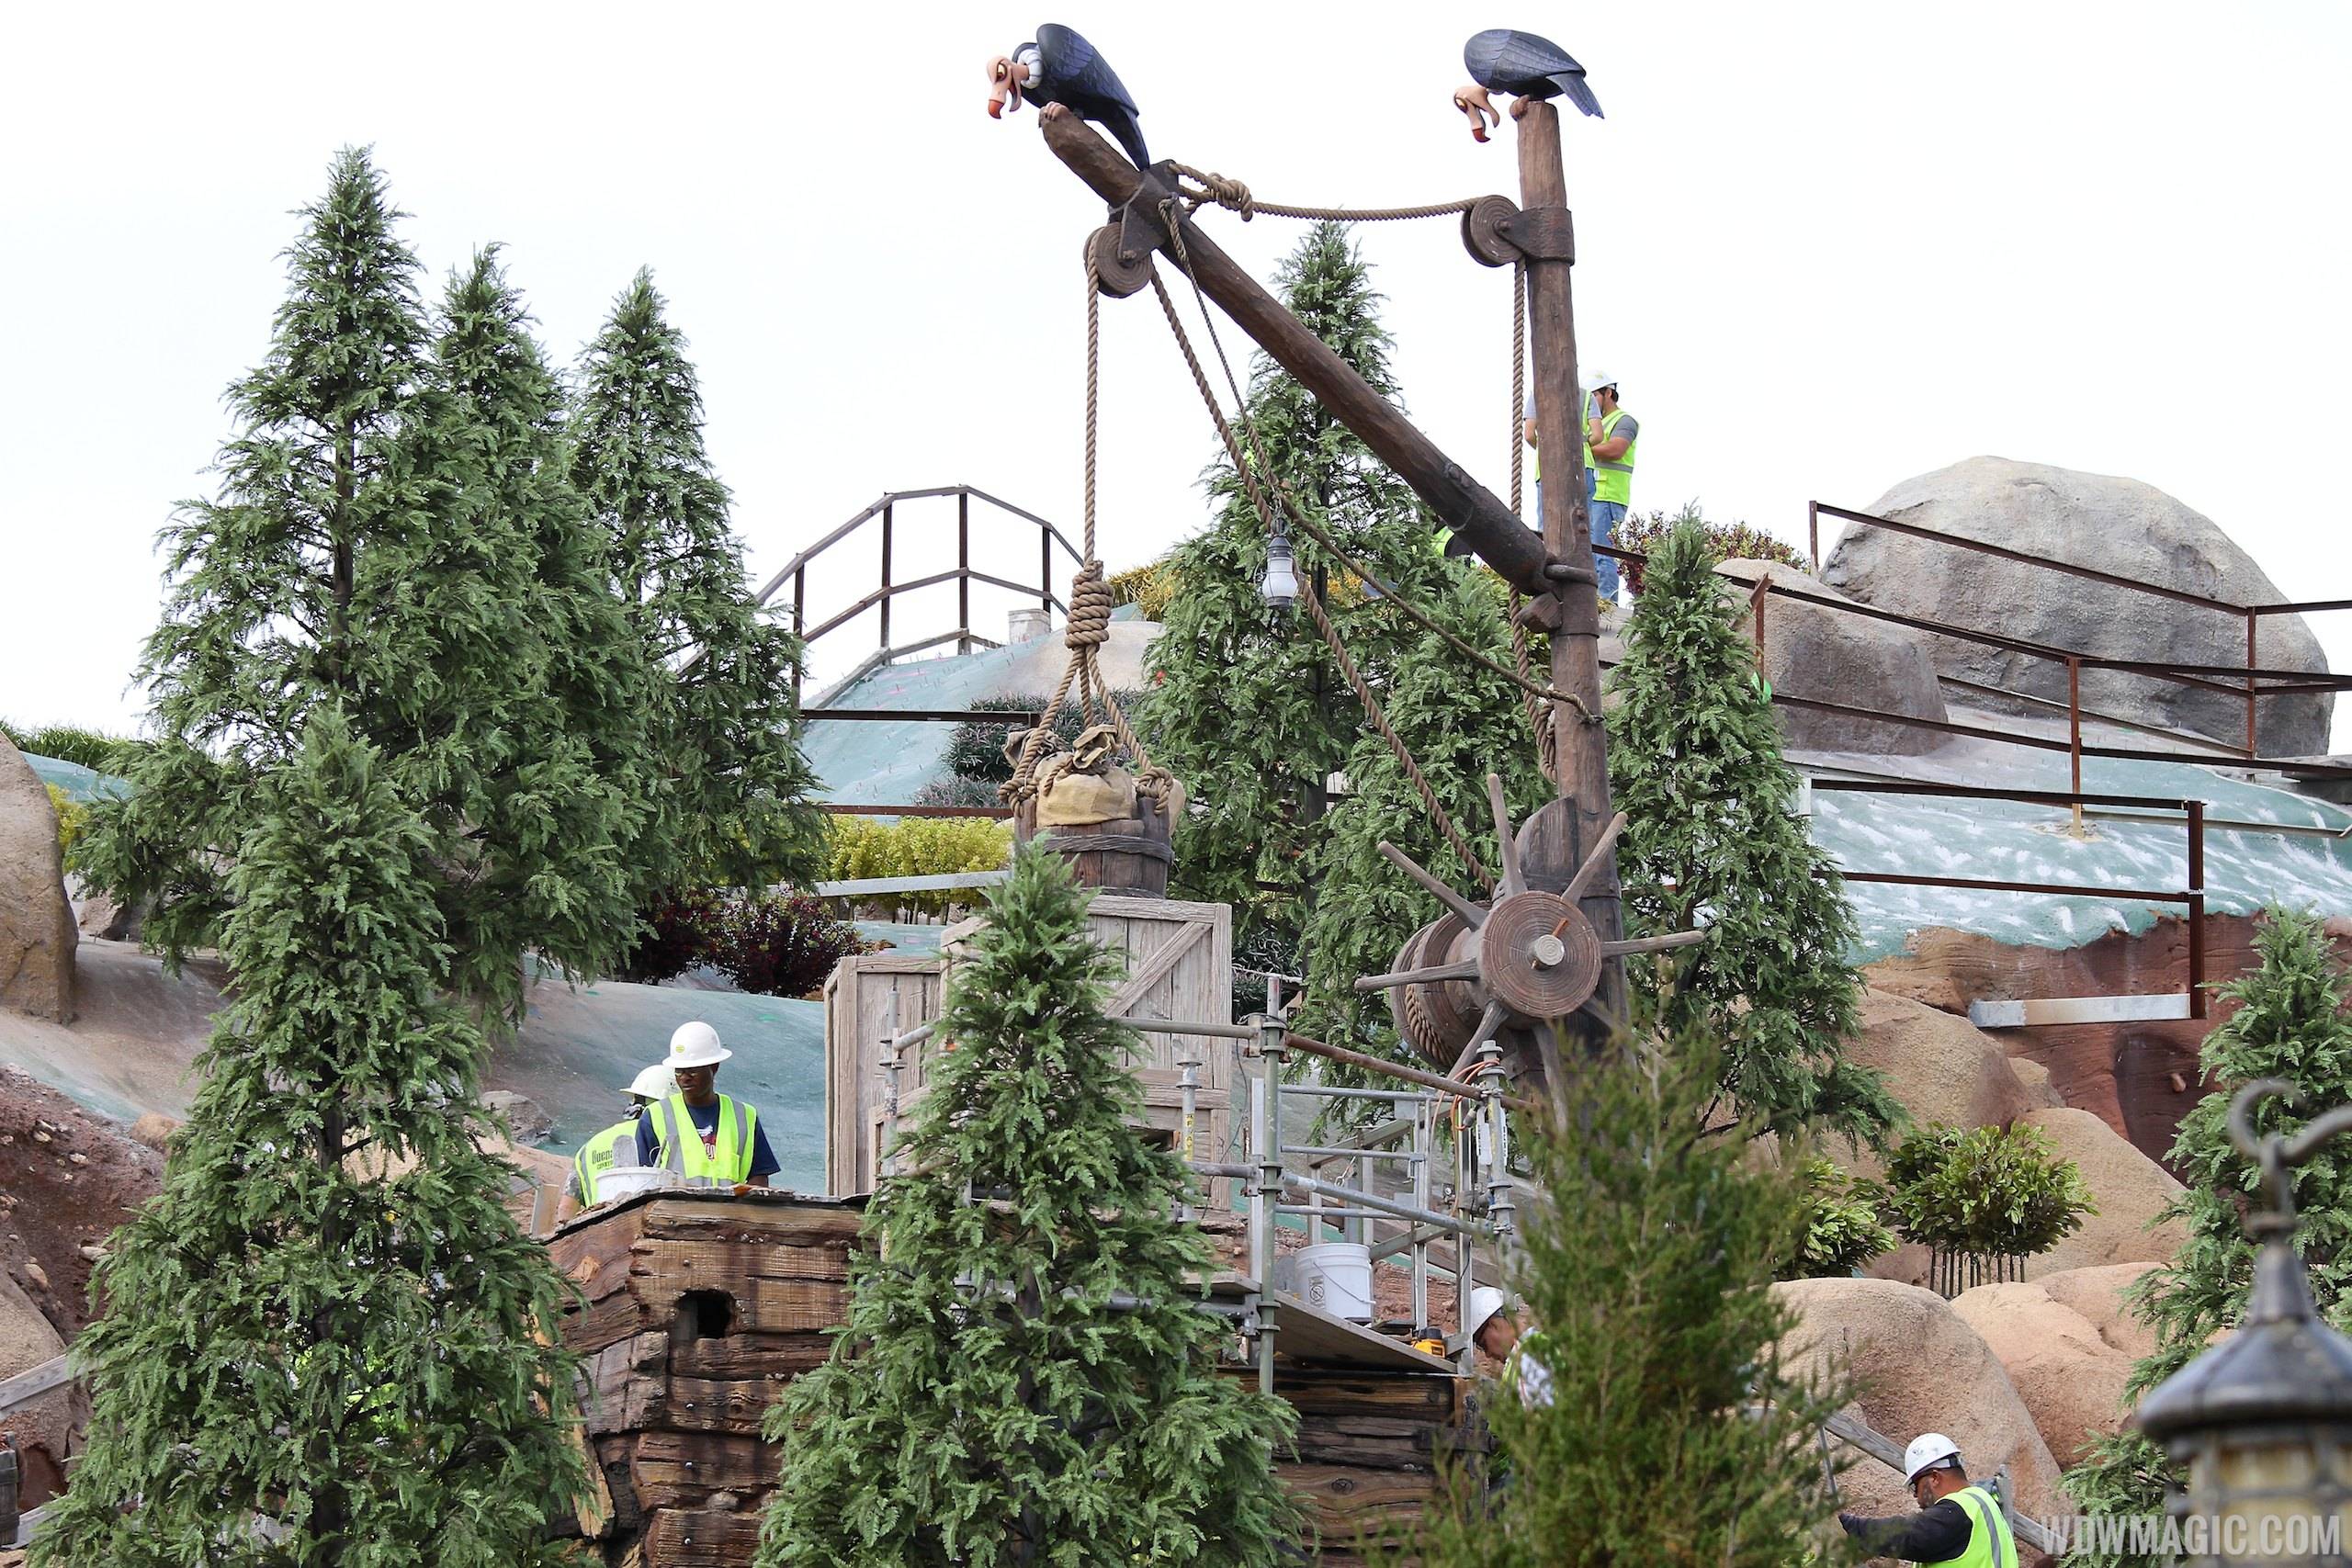 Crews working on landscaping at the Seven Dwarfs Mine Train coaster